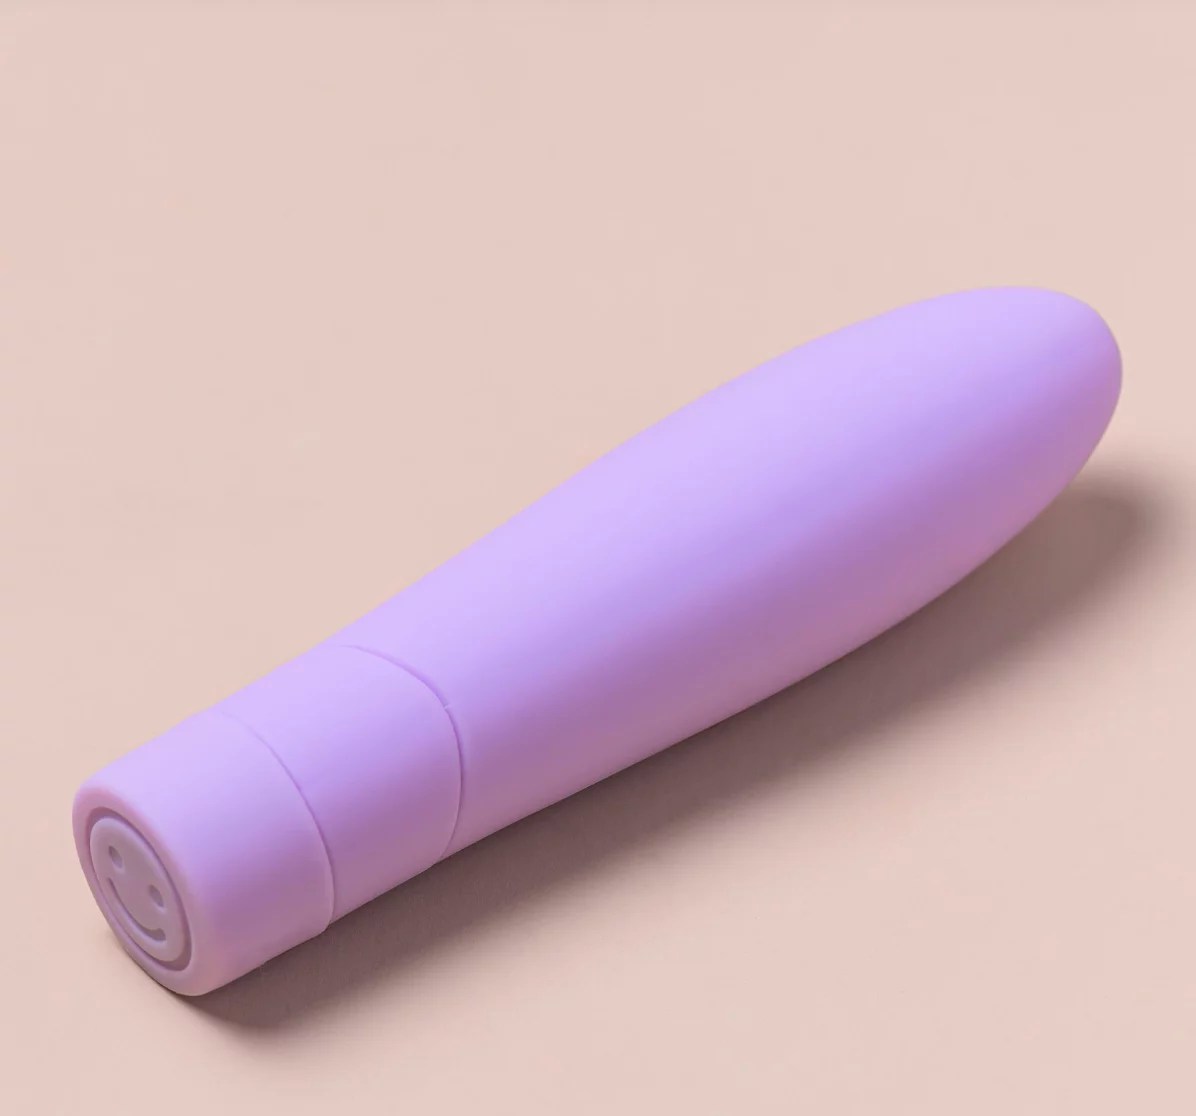 Smile Makers Vibrators for Every Type of Pleasure-Seeker | Well+Good